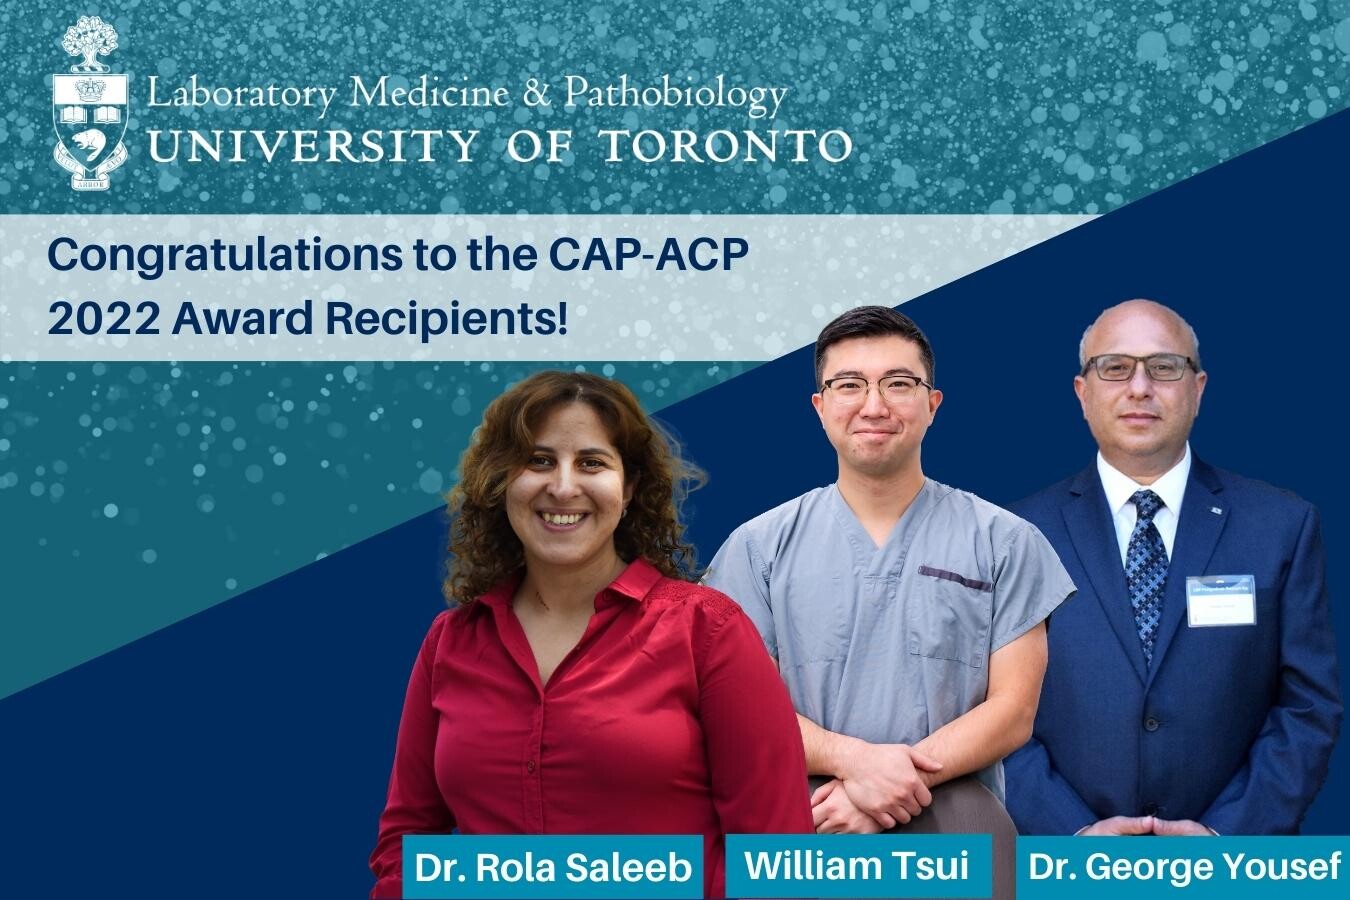 Congratulations to the CAP-ACP 2022 award winners at LMP! Picture of Dr. Rola Saleeb, William Tsui and Dr. George Yousef.